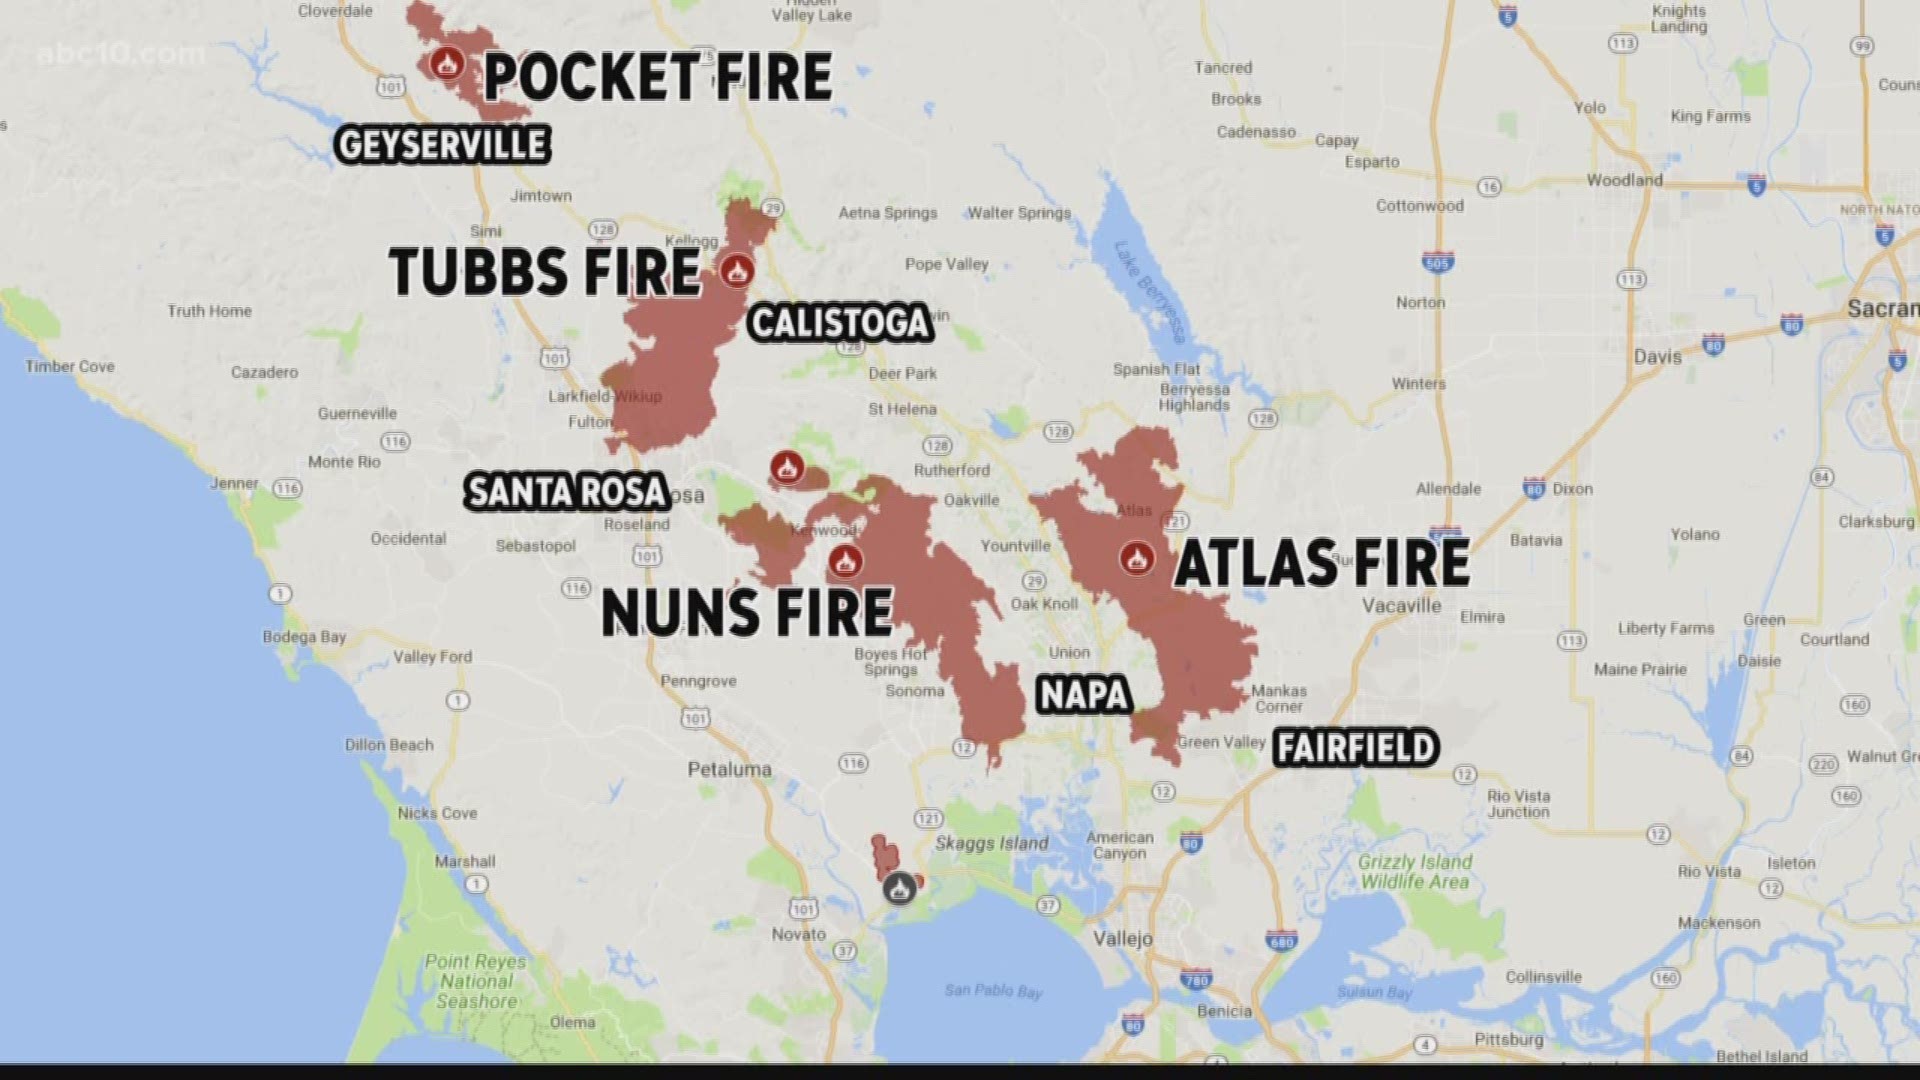 Things are looking up as firefighters continue to get more containment of the fires in Northern California.